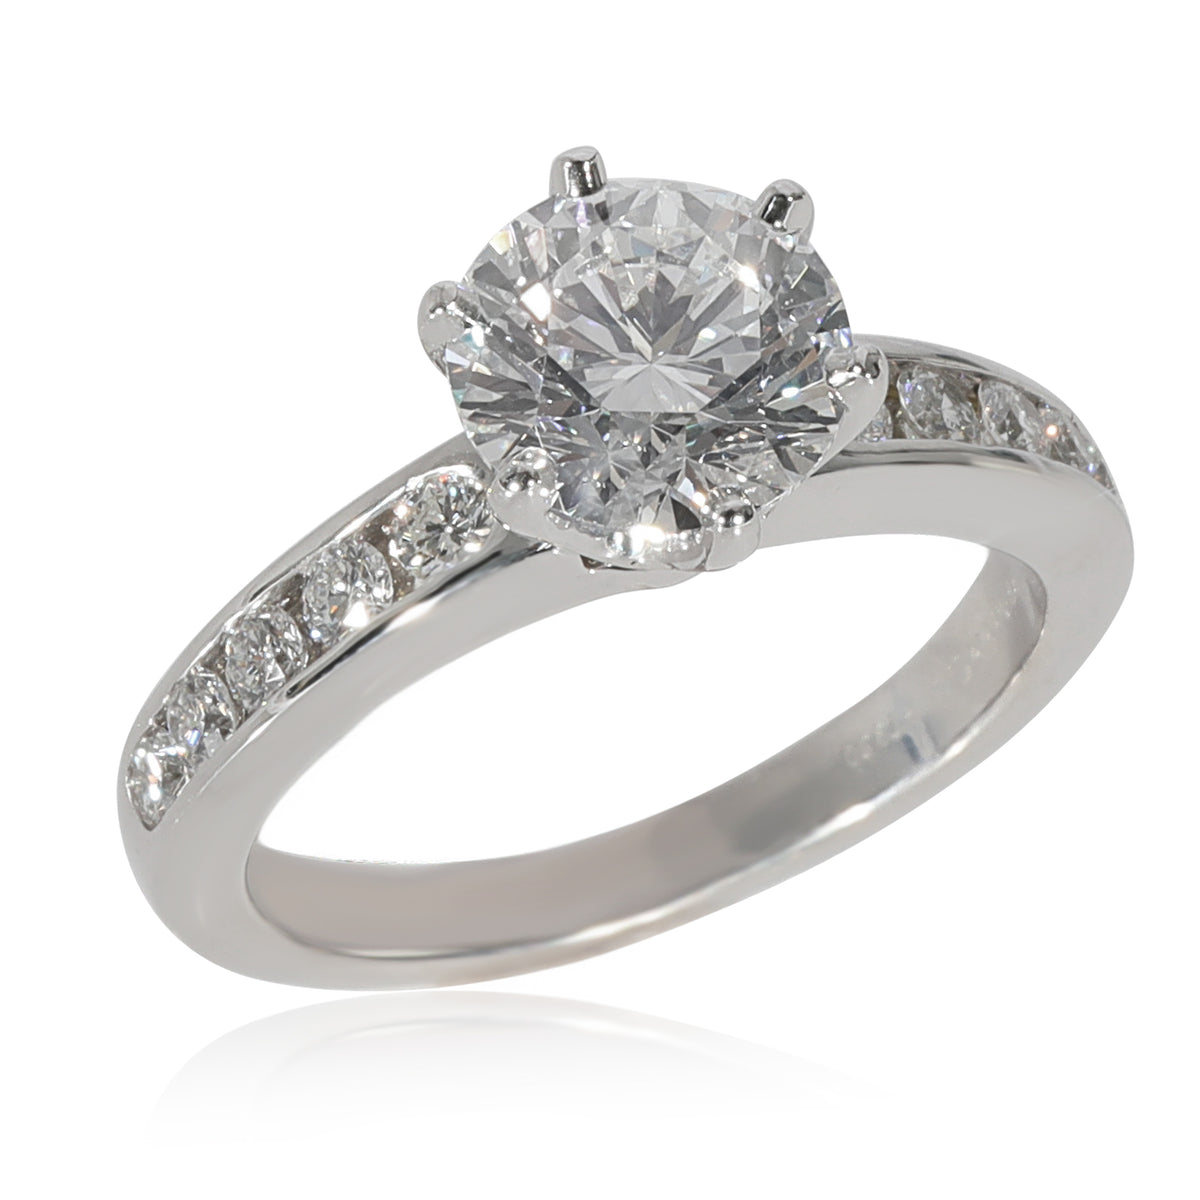 Tiffany & Co. Channel Diamond Engagement Ring in Platinum E VS2 1.88 CTW